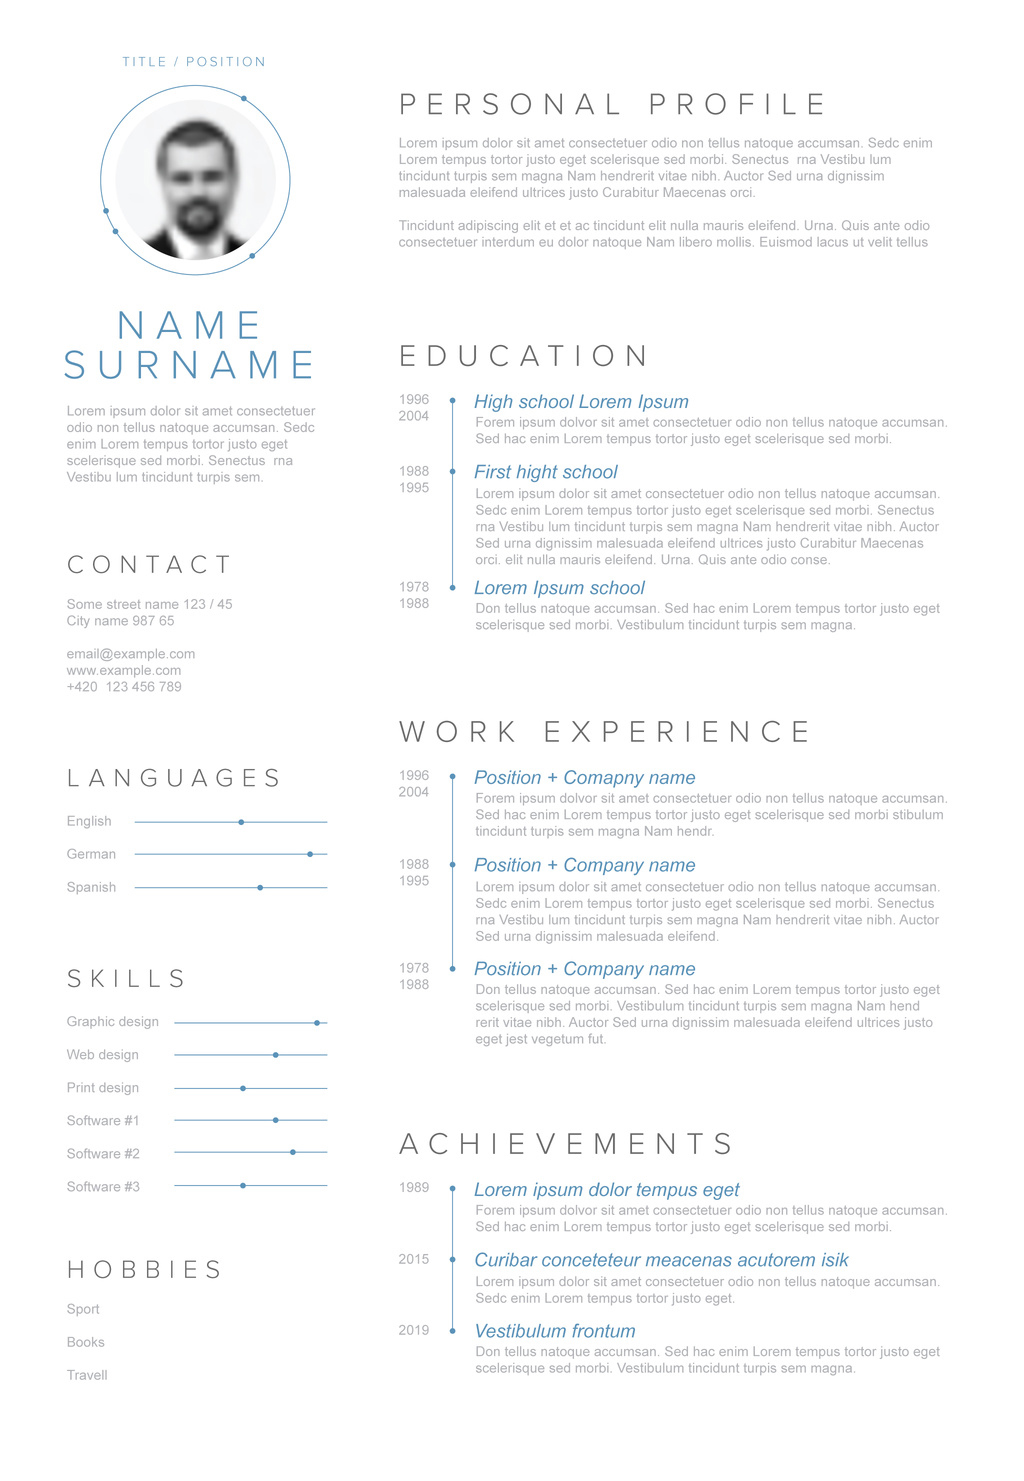 Minimalist Resume Layout with Slate Blue Accents (AI Format)